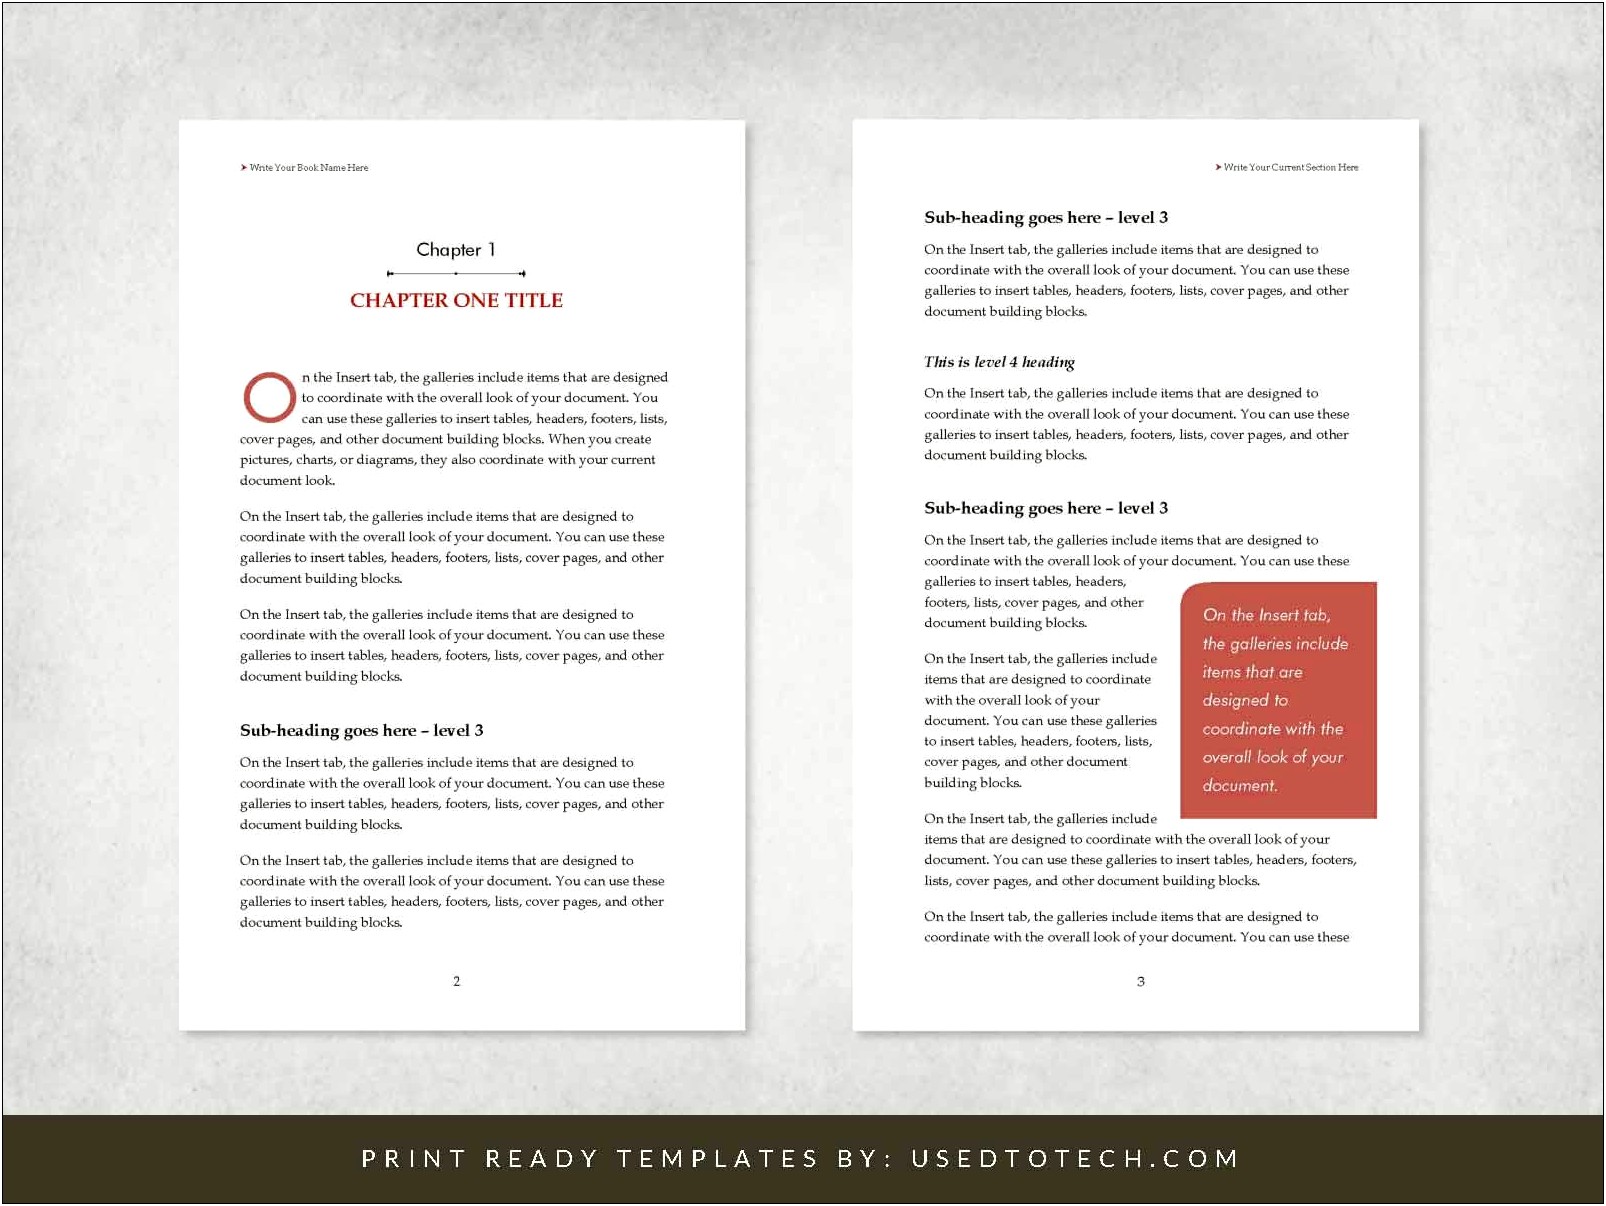 Ms Word Template For A Booklet